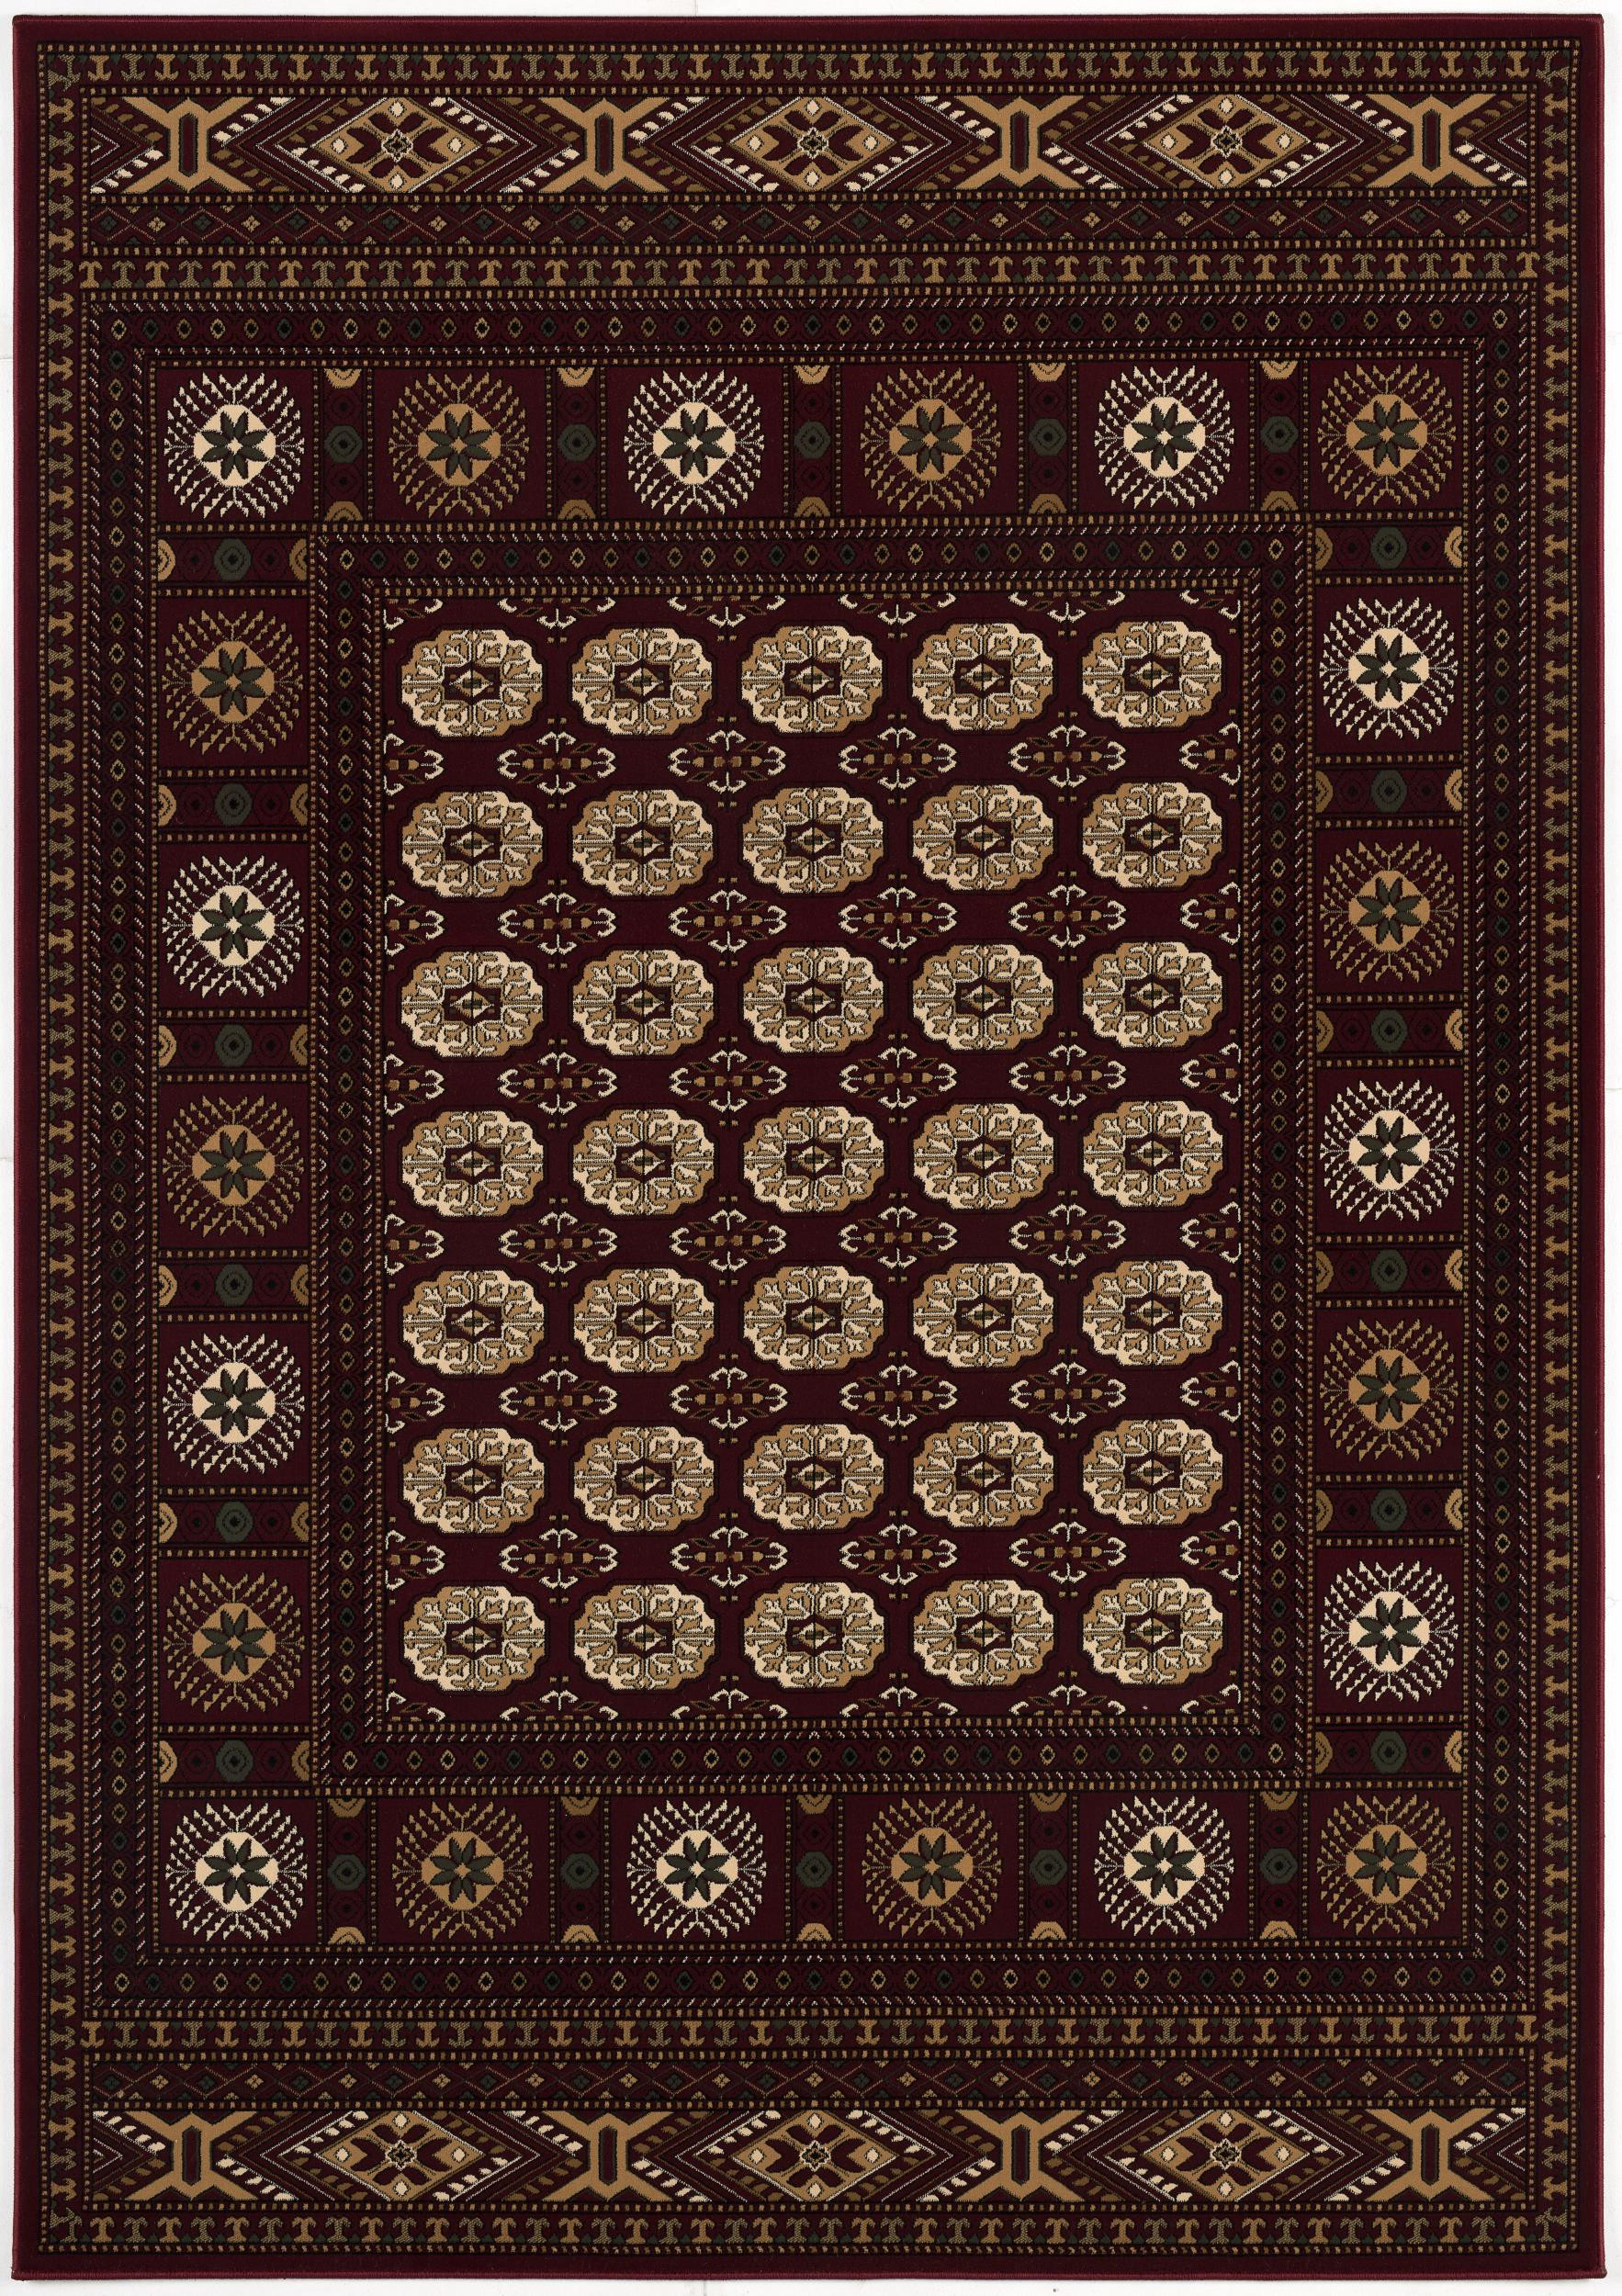 4’ x 6’ Red Eclectic Geometric Pattern Area Rug-395468-1